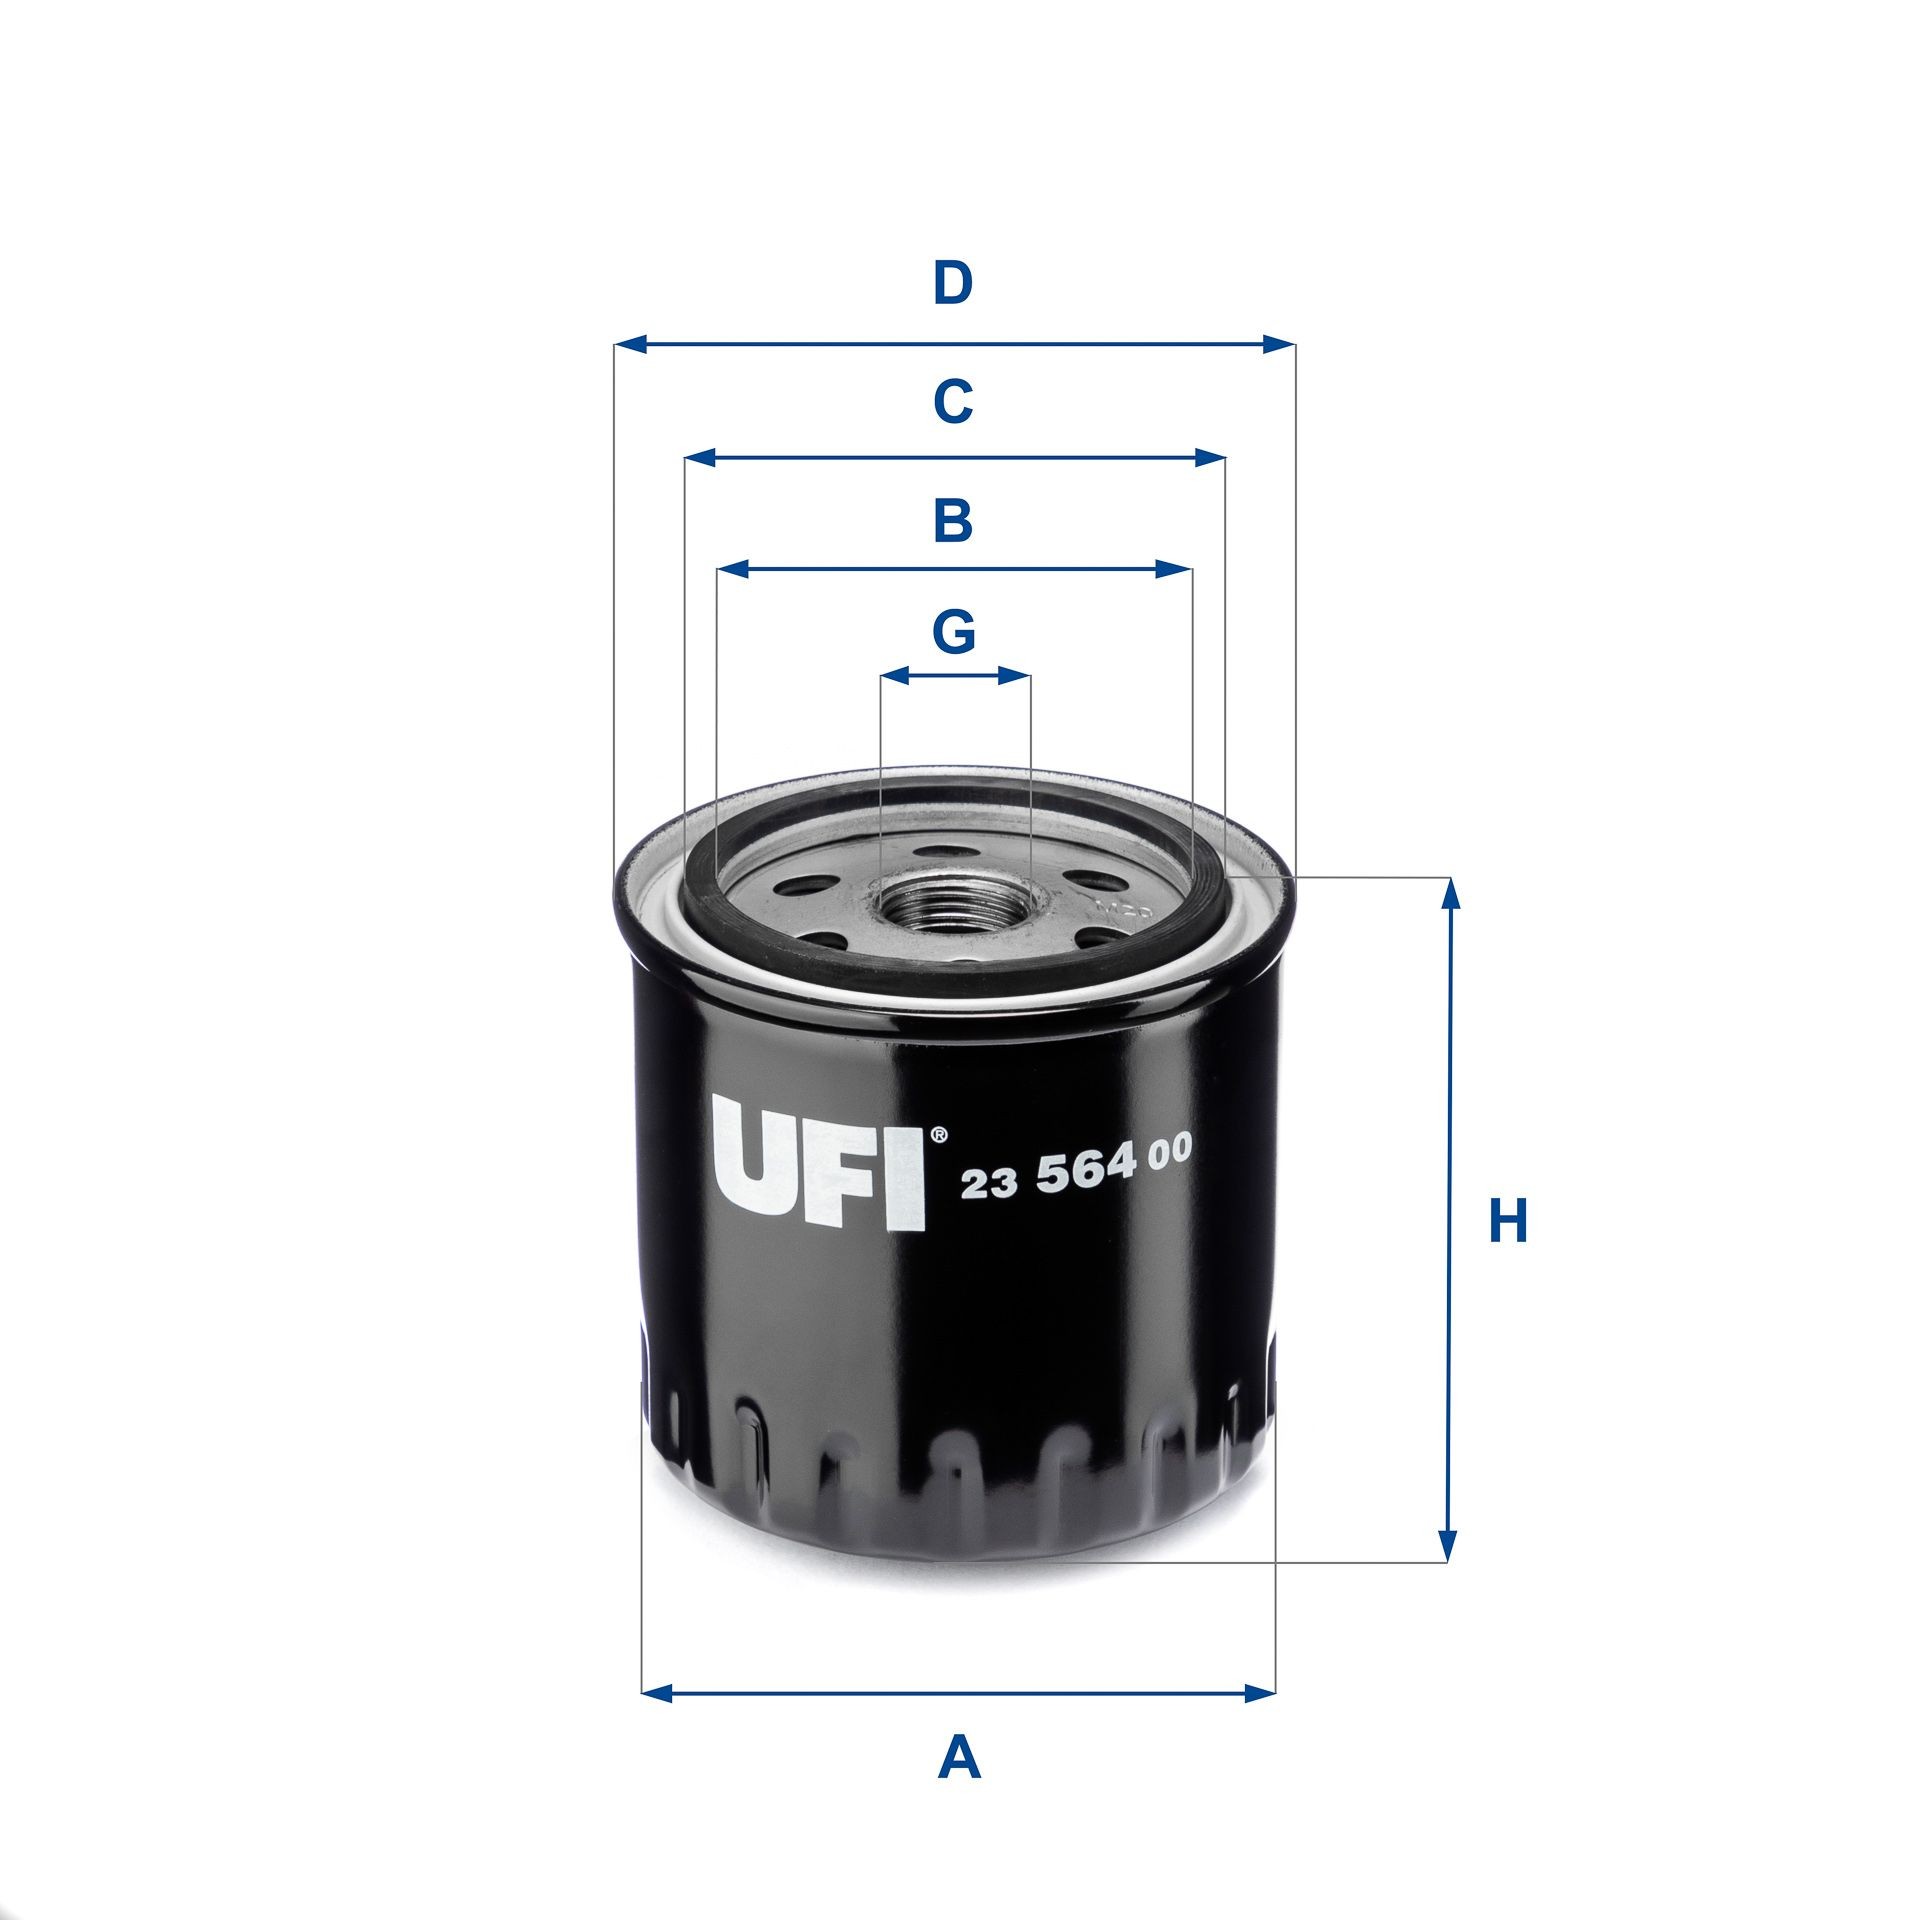 23.564.00 UFI Oil filters NISSAN M 20 X 1,5, with one anti-return valve, Spin-on Filter